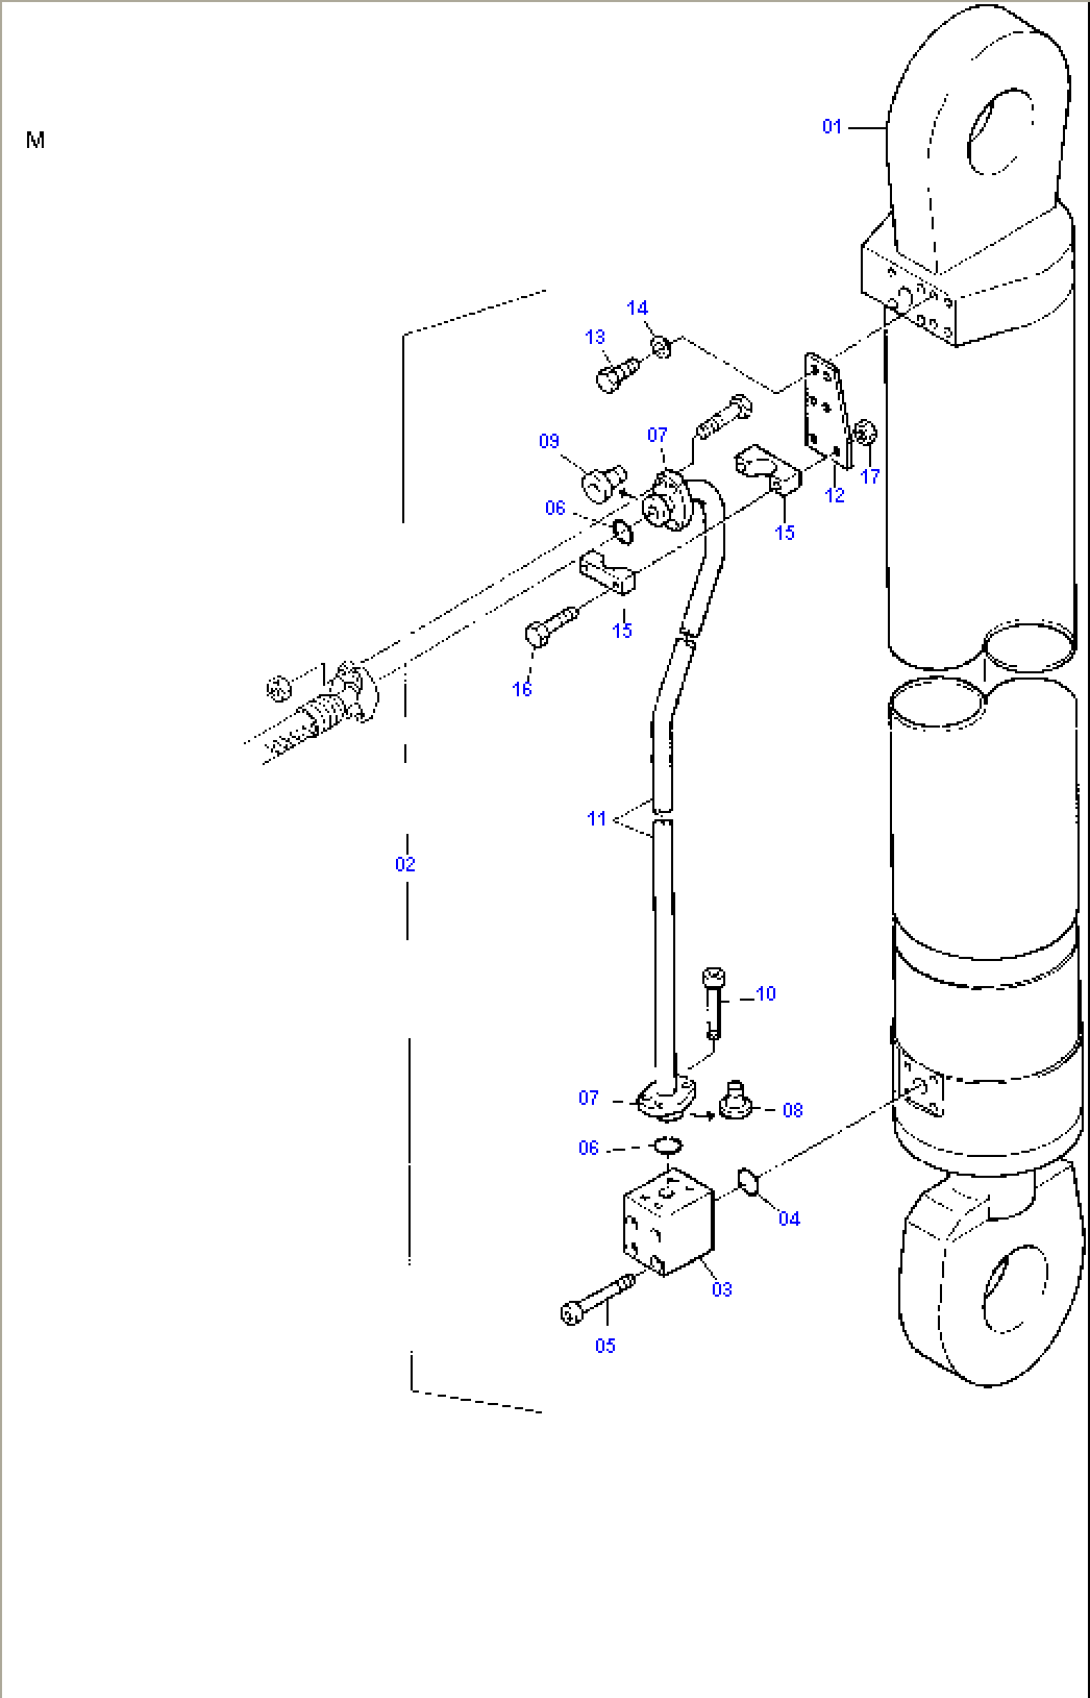 Piping - Backhoe Cylinder